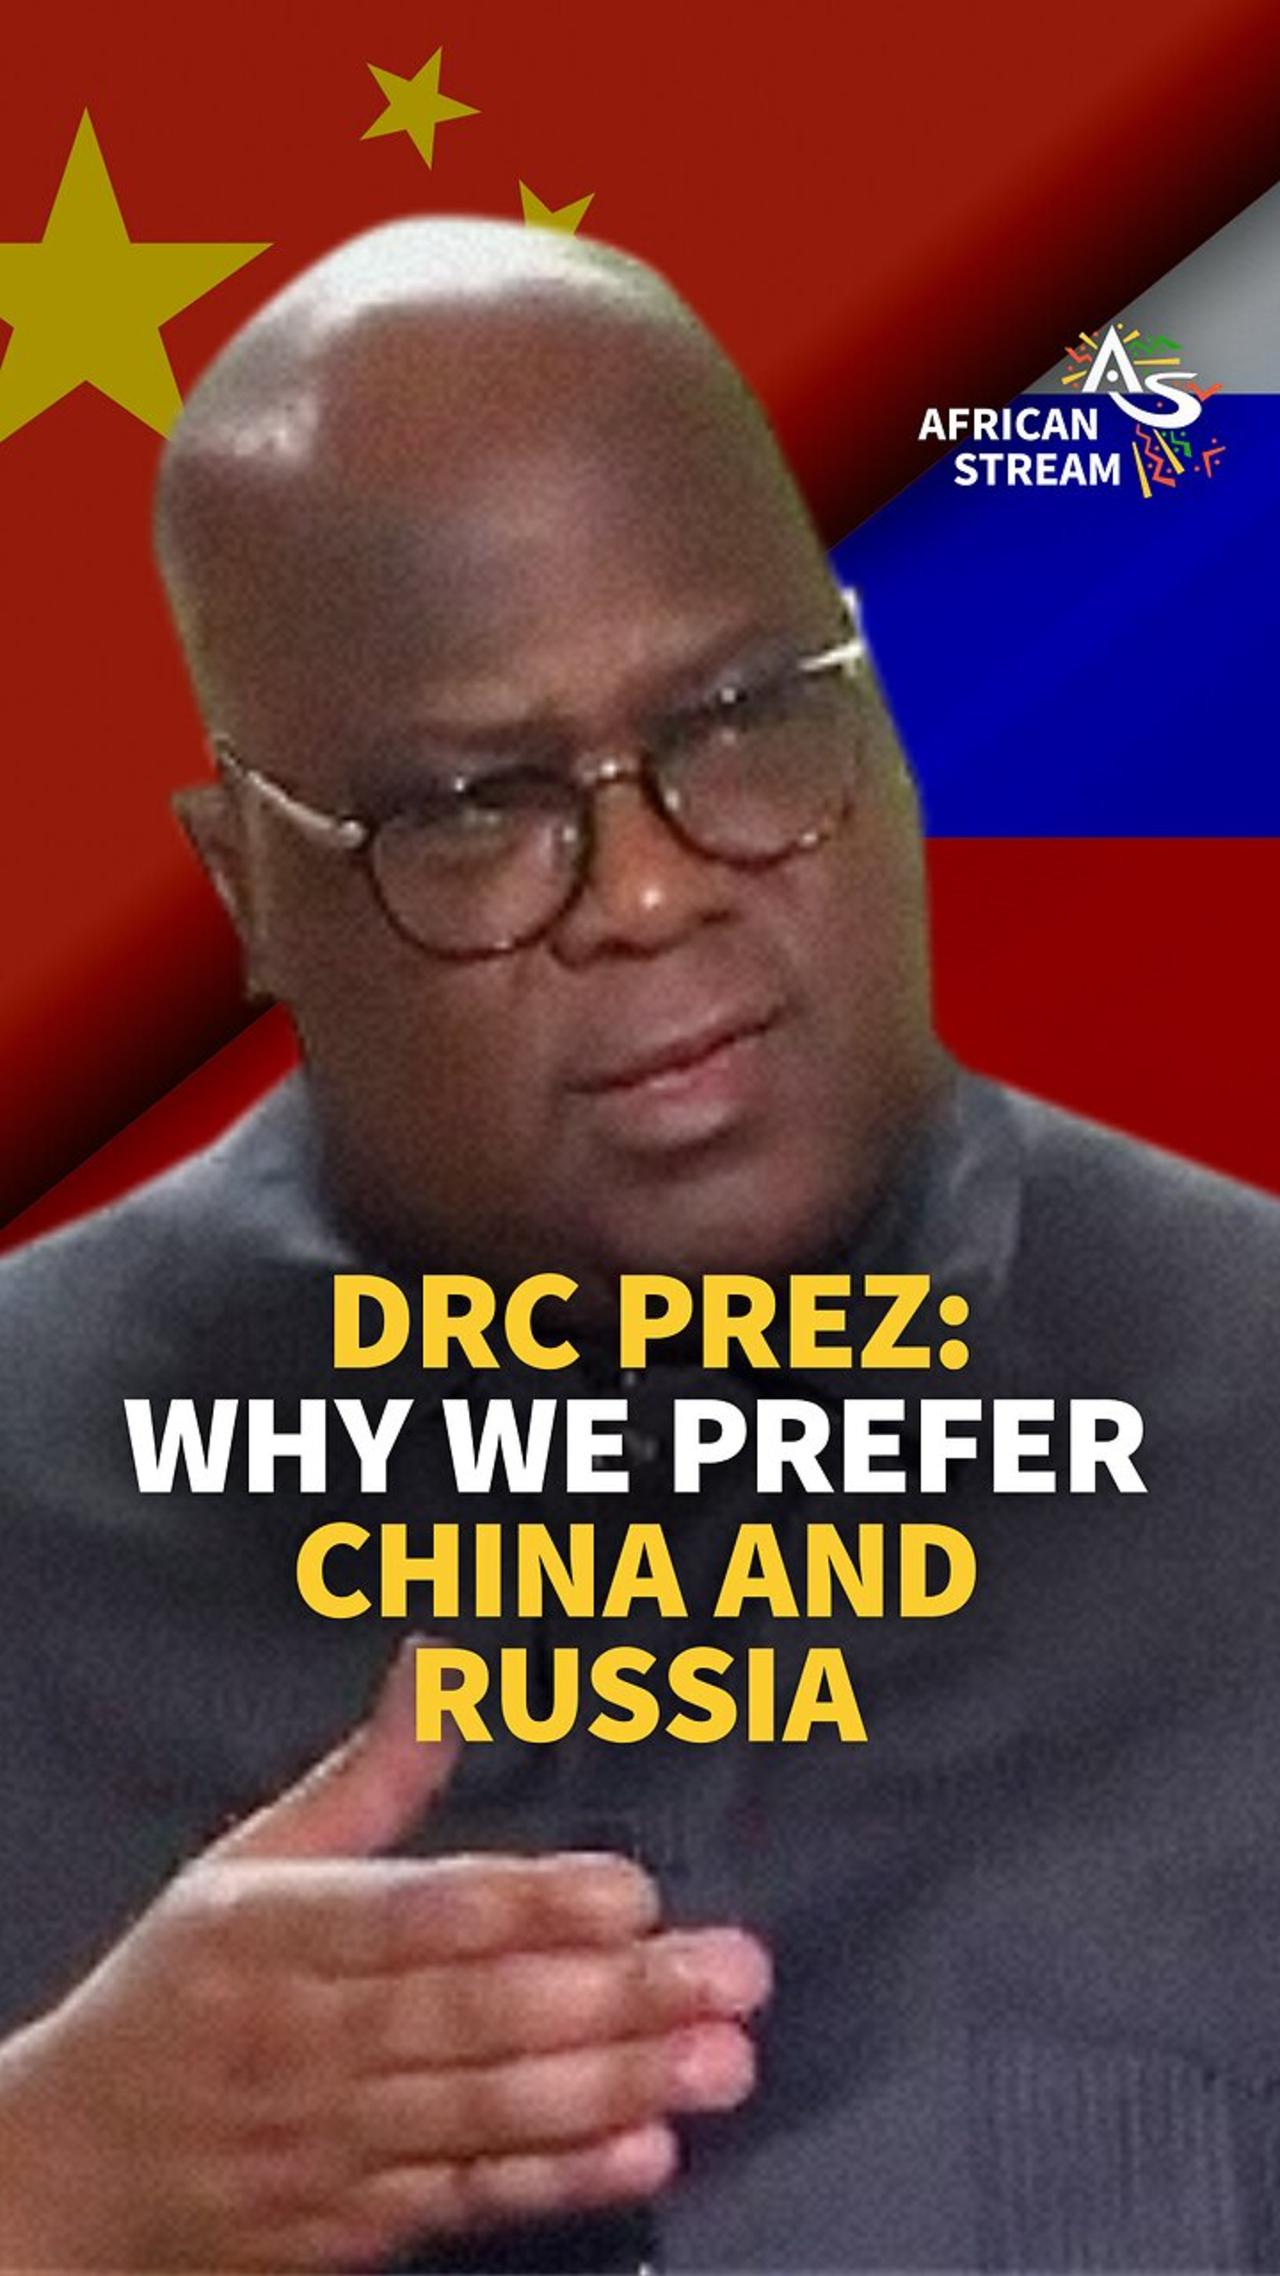 DRC PREZ: WHY WE PREFER CHINA AND RUSSIA